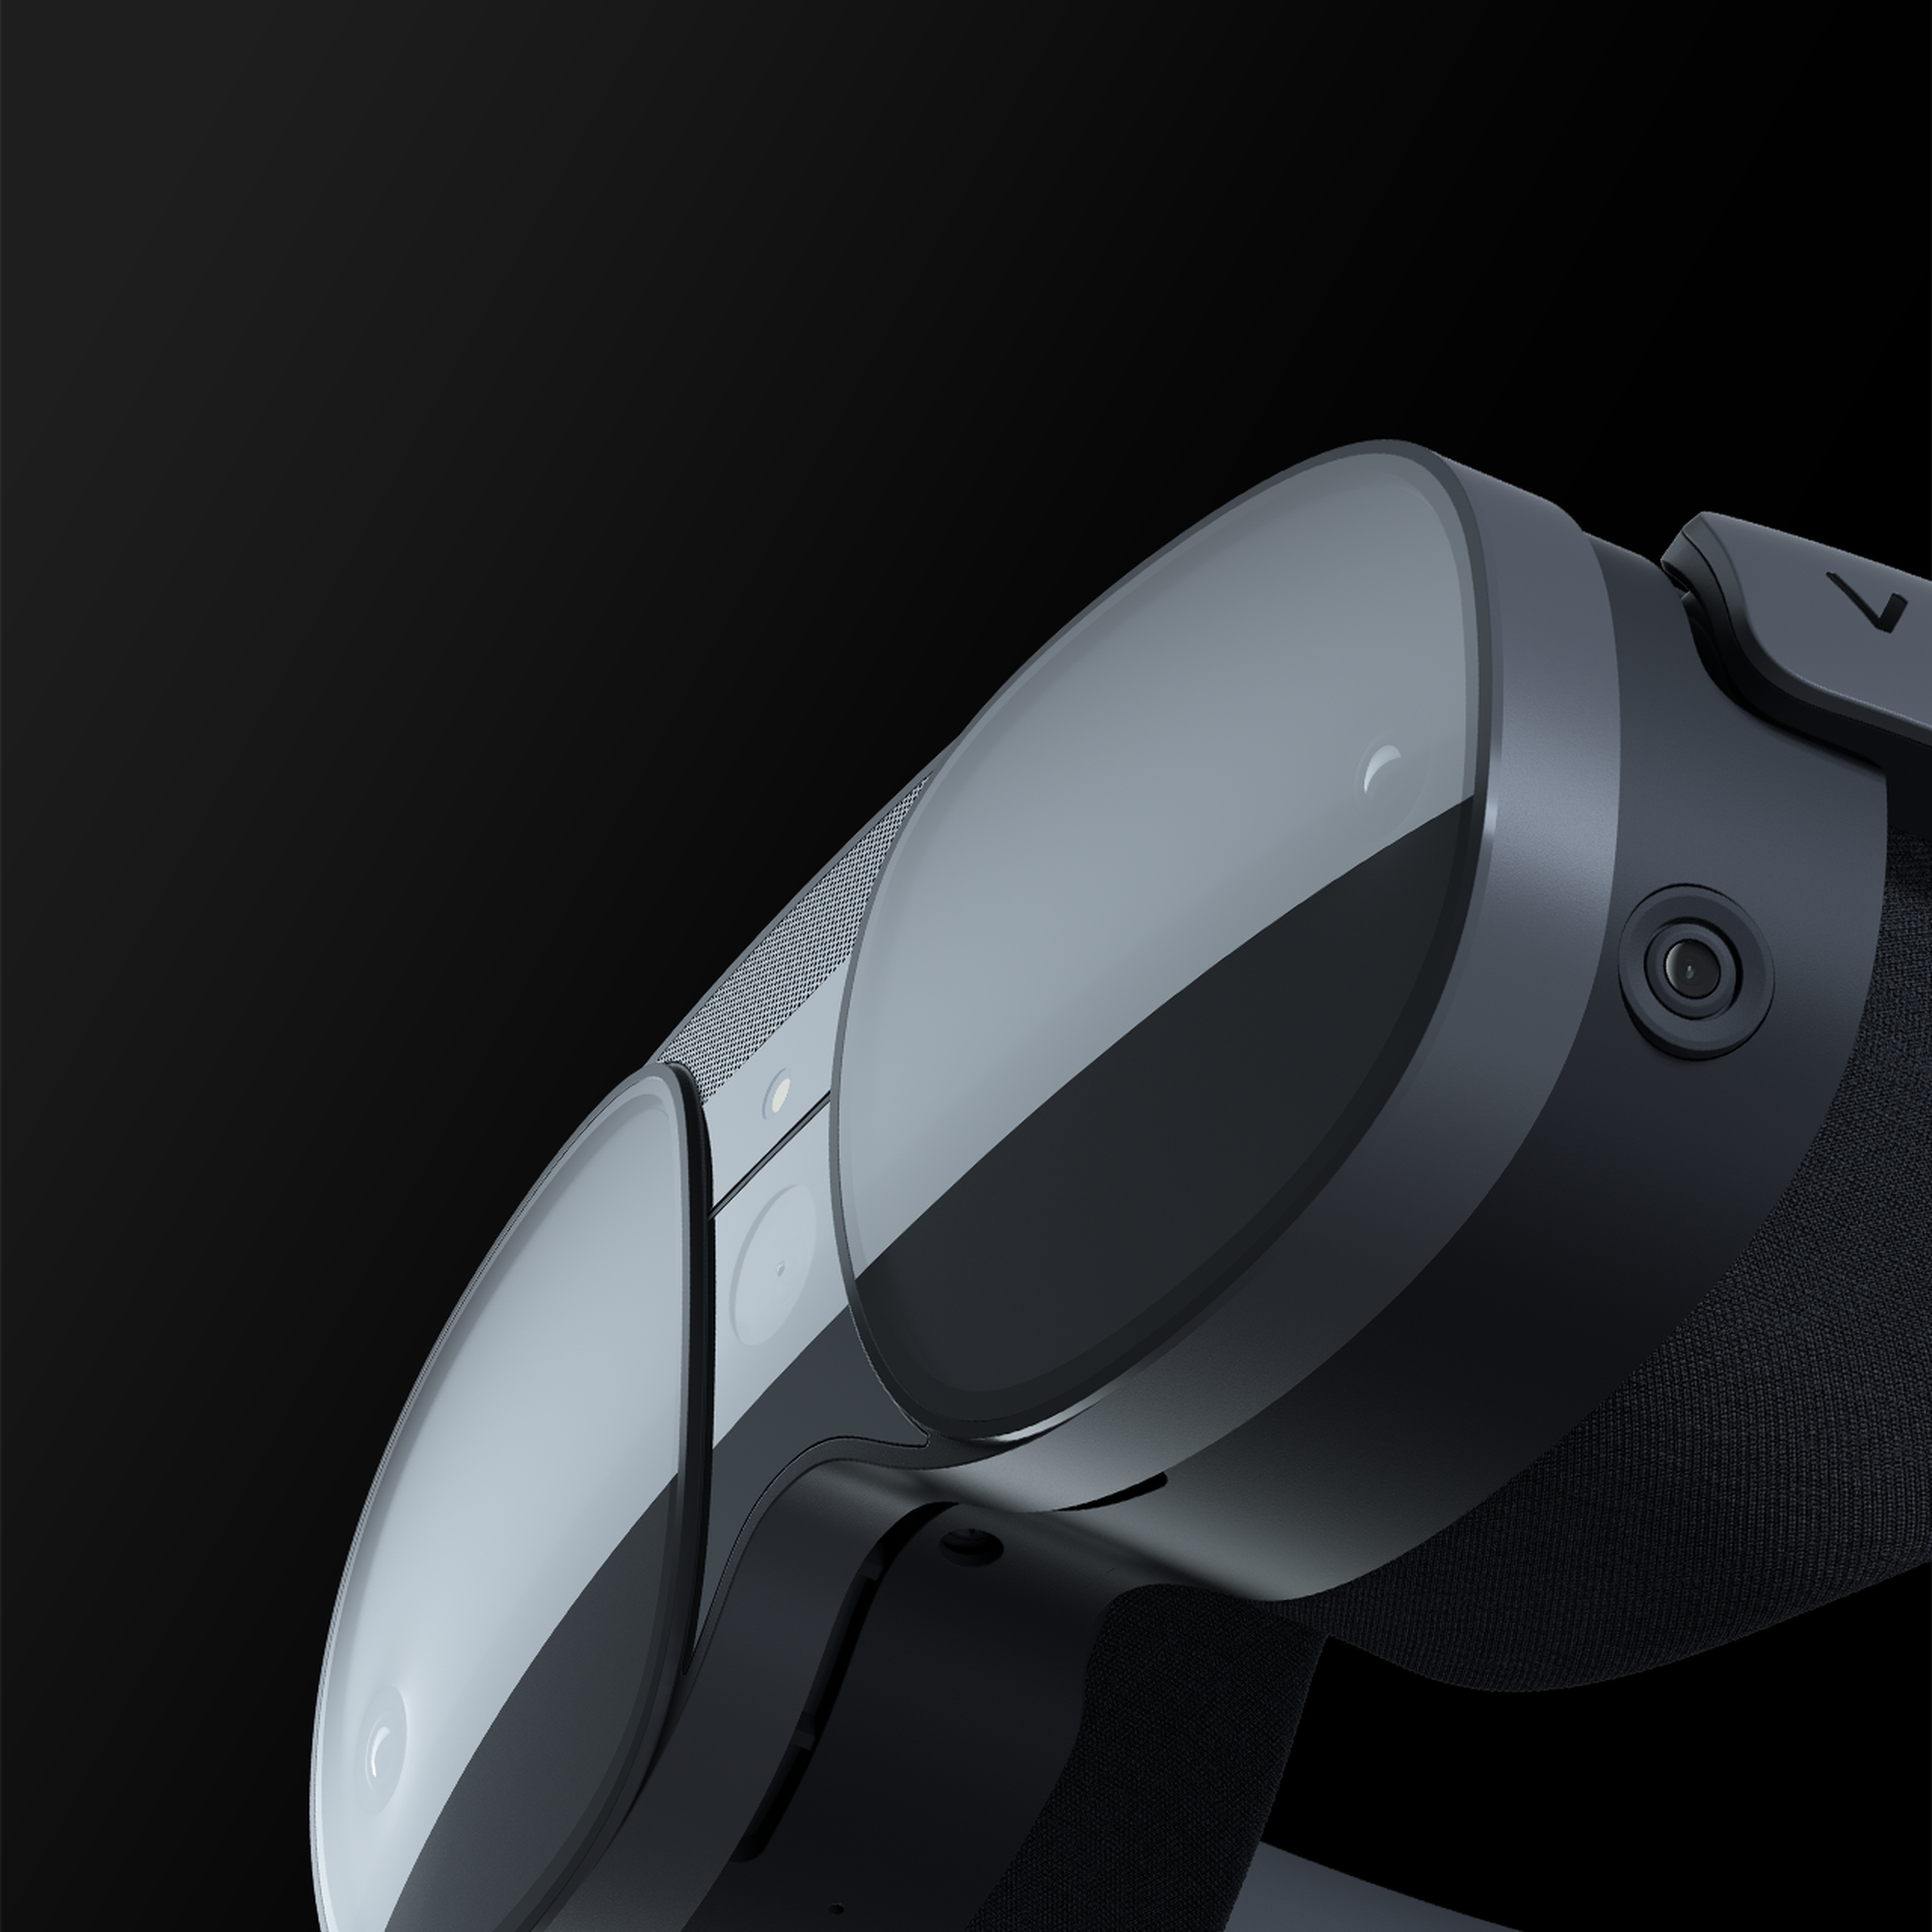 A partial view of a black VR headset design with outward-facing cameras.